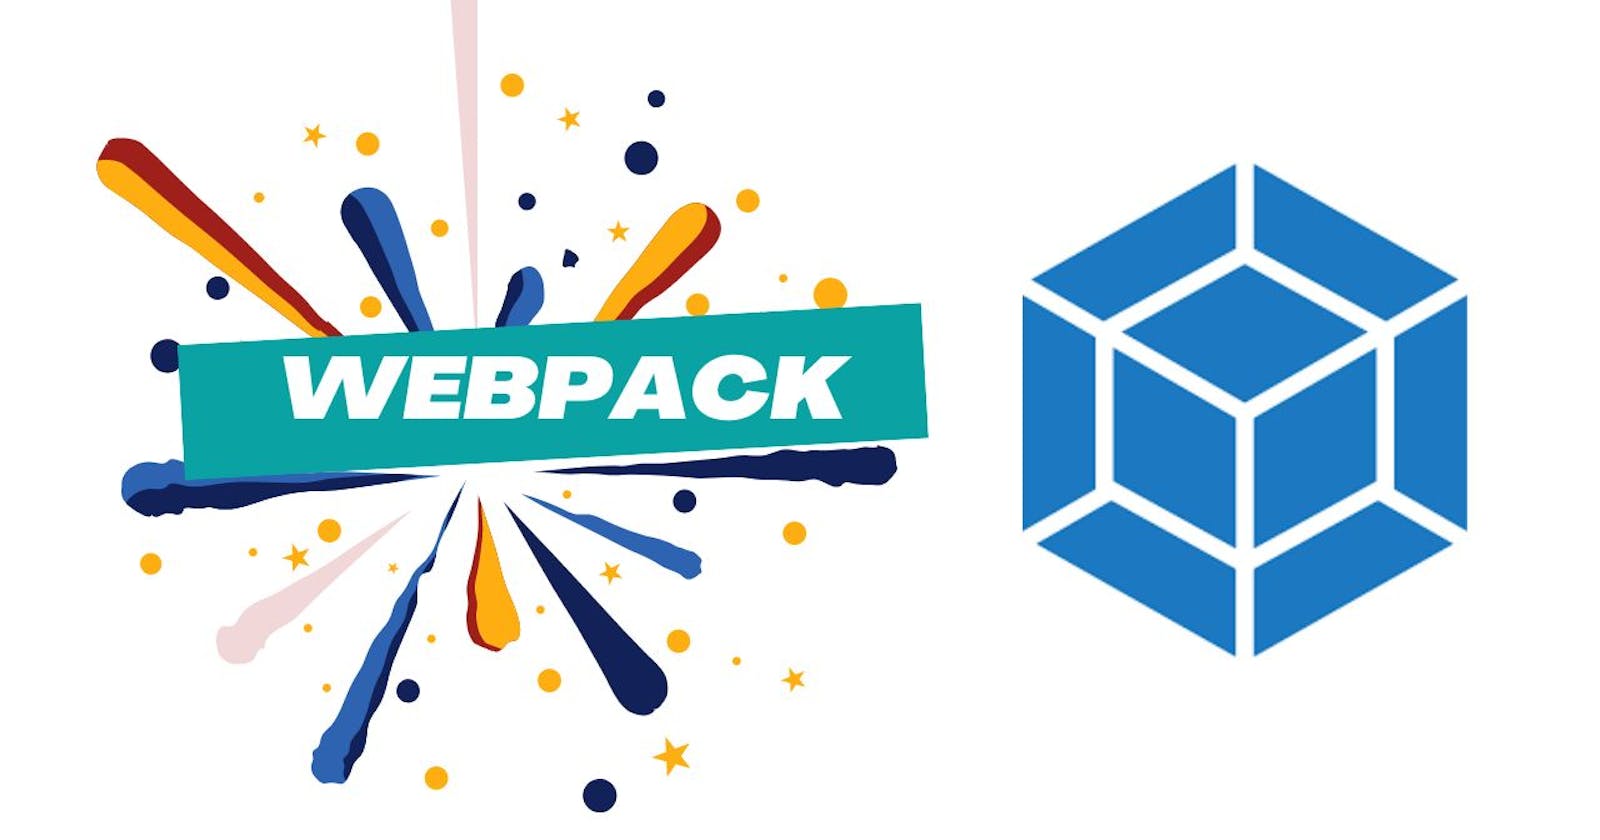 Webpack: A Friendly Introduction to a Powerful Tool